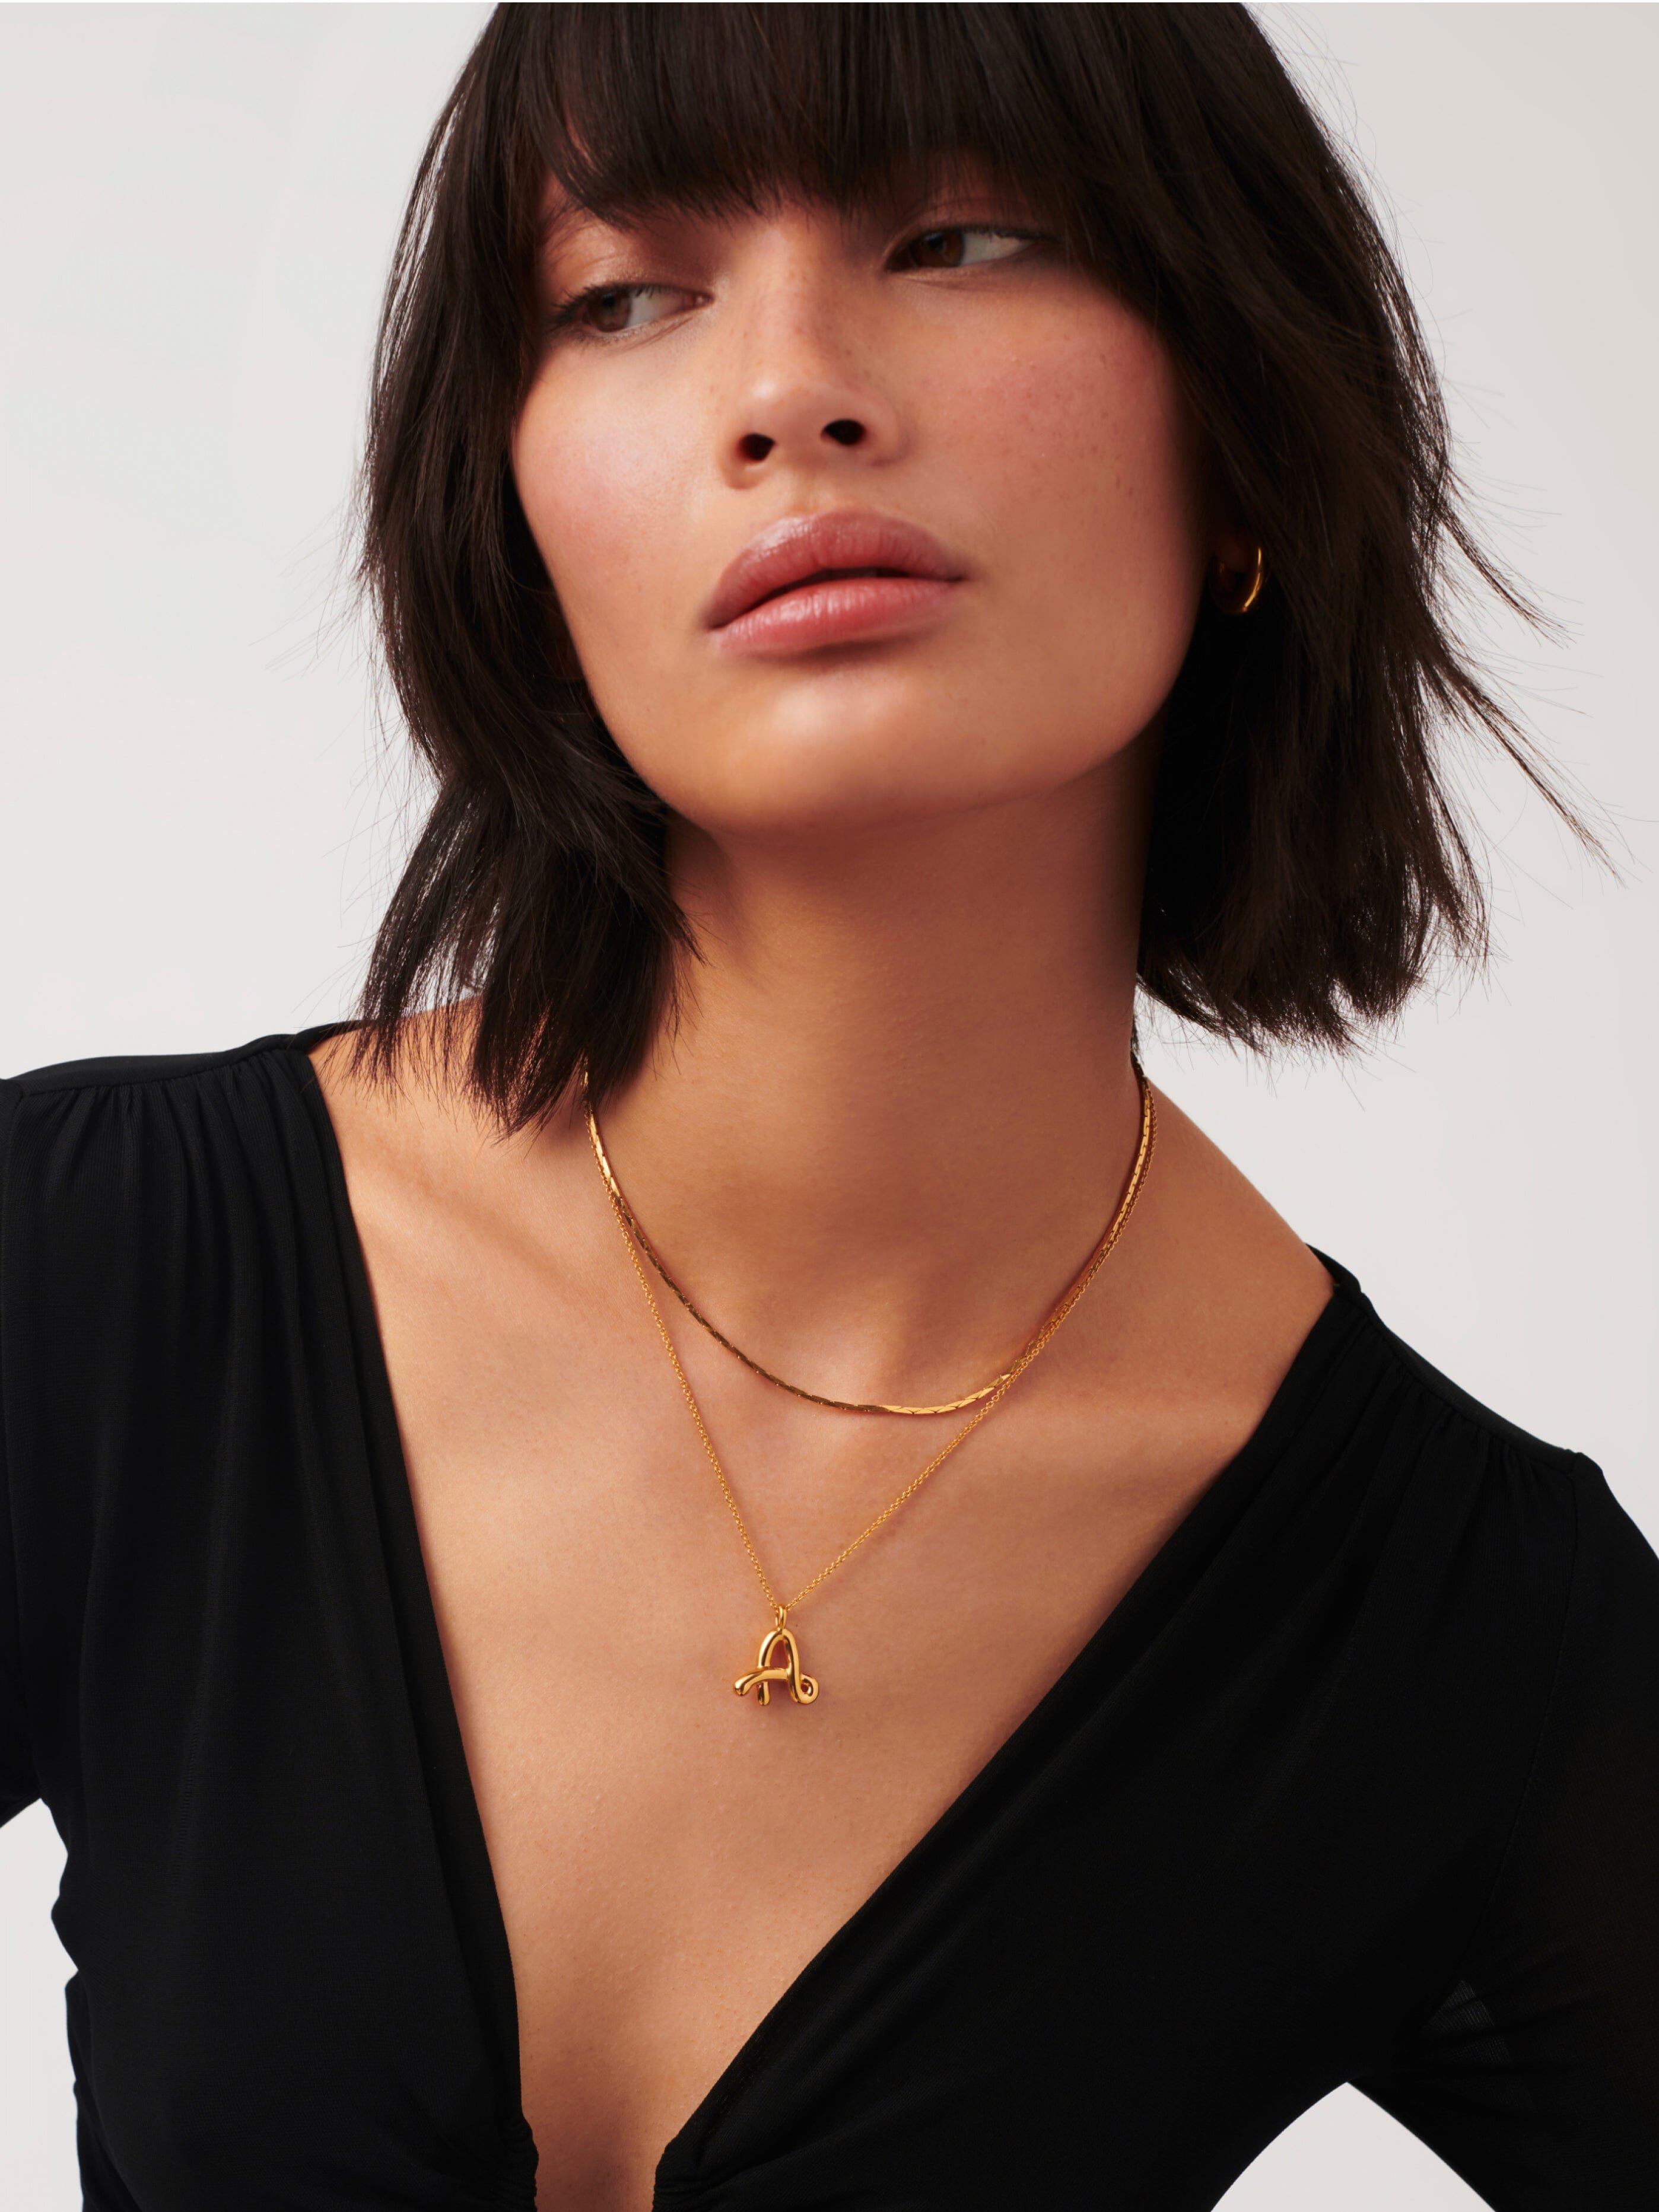 Lucy Williams Cobra Snake Chain Necklace | 18ct Gold Plated Necklaces Missoma 